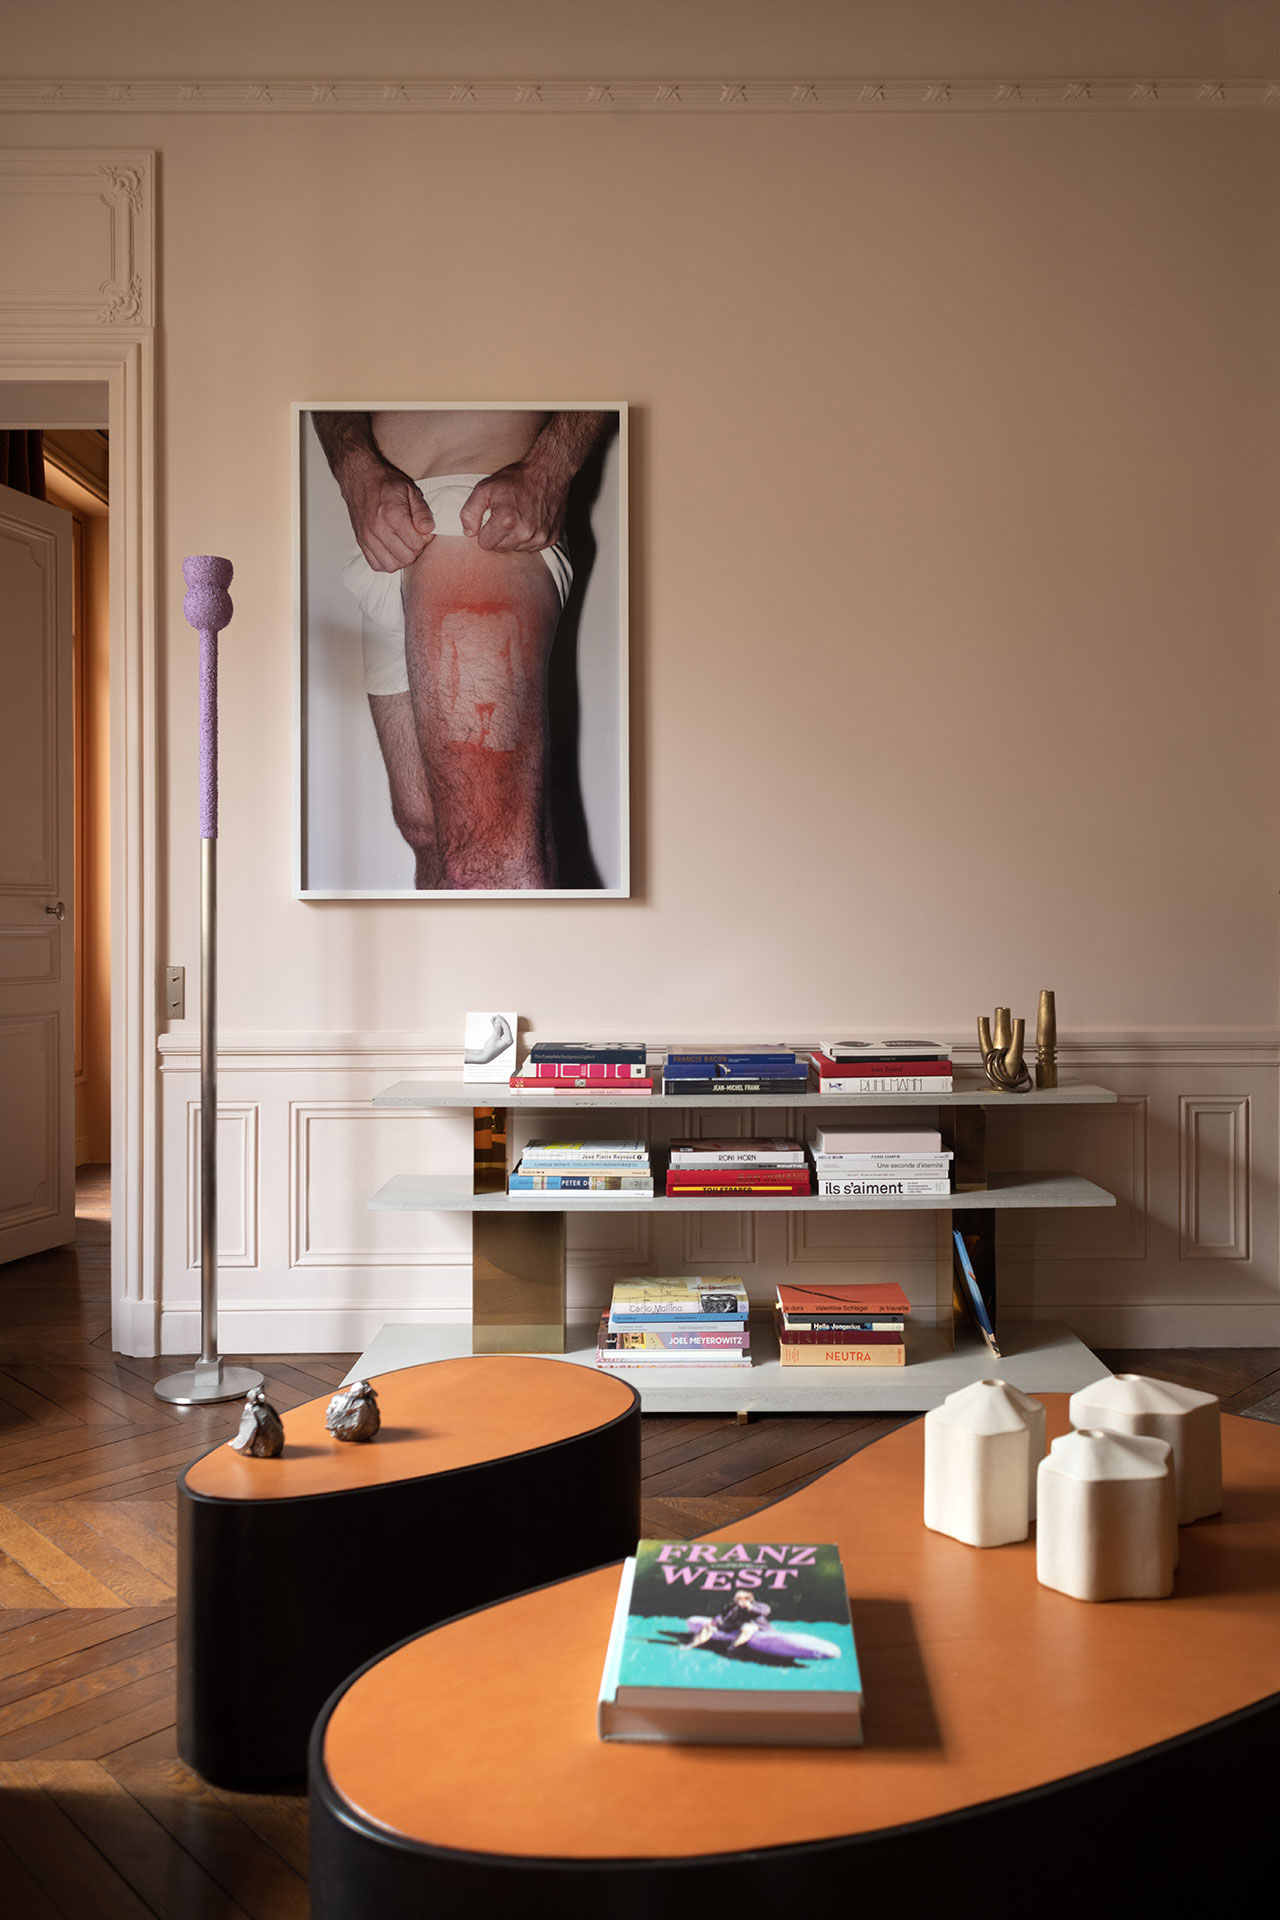 Photography by Giulio Ghirardi.
Featured: 'Lacrima' coffee table by Rodolphe Parente; 'Nuvole' set of 3 candlesticks by Isabelle Sicart &amp; Francesco Balzano (Galerie Carole Dacombe); 'Gesso' floor lamp by Rodolphe Parente; Framed photograph by Thomas Mailaender.